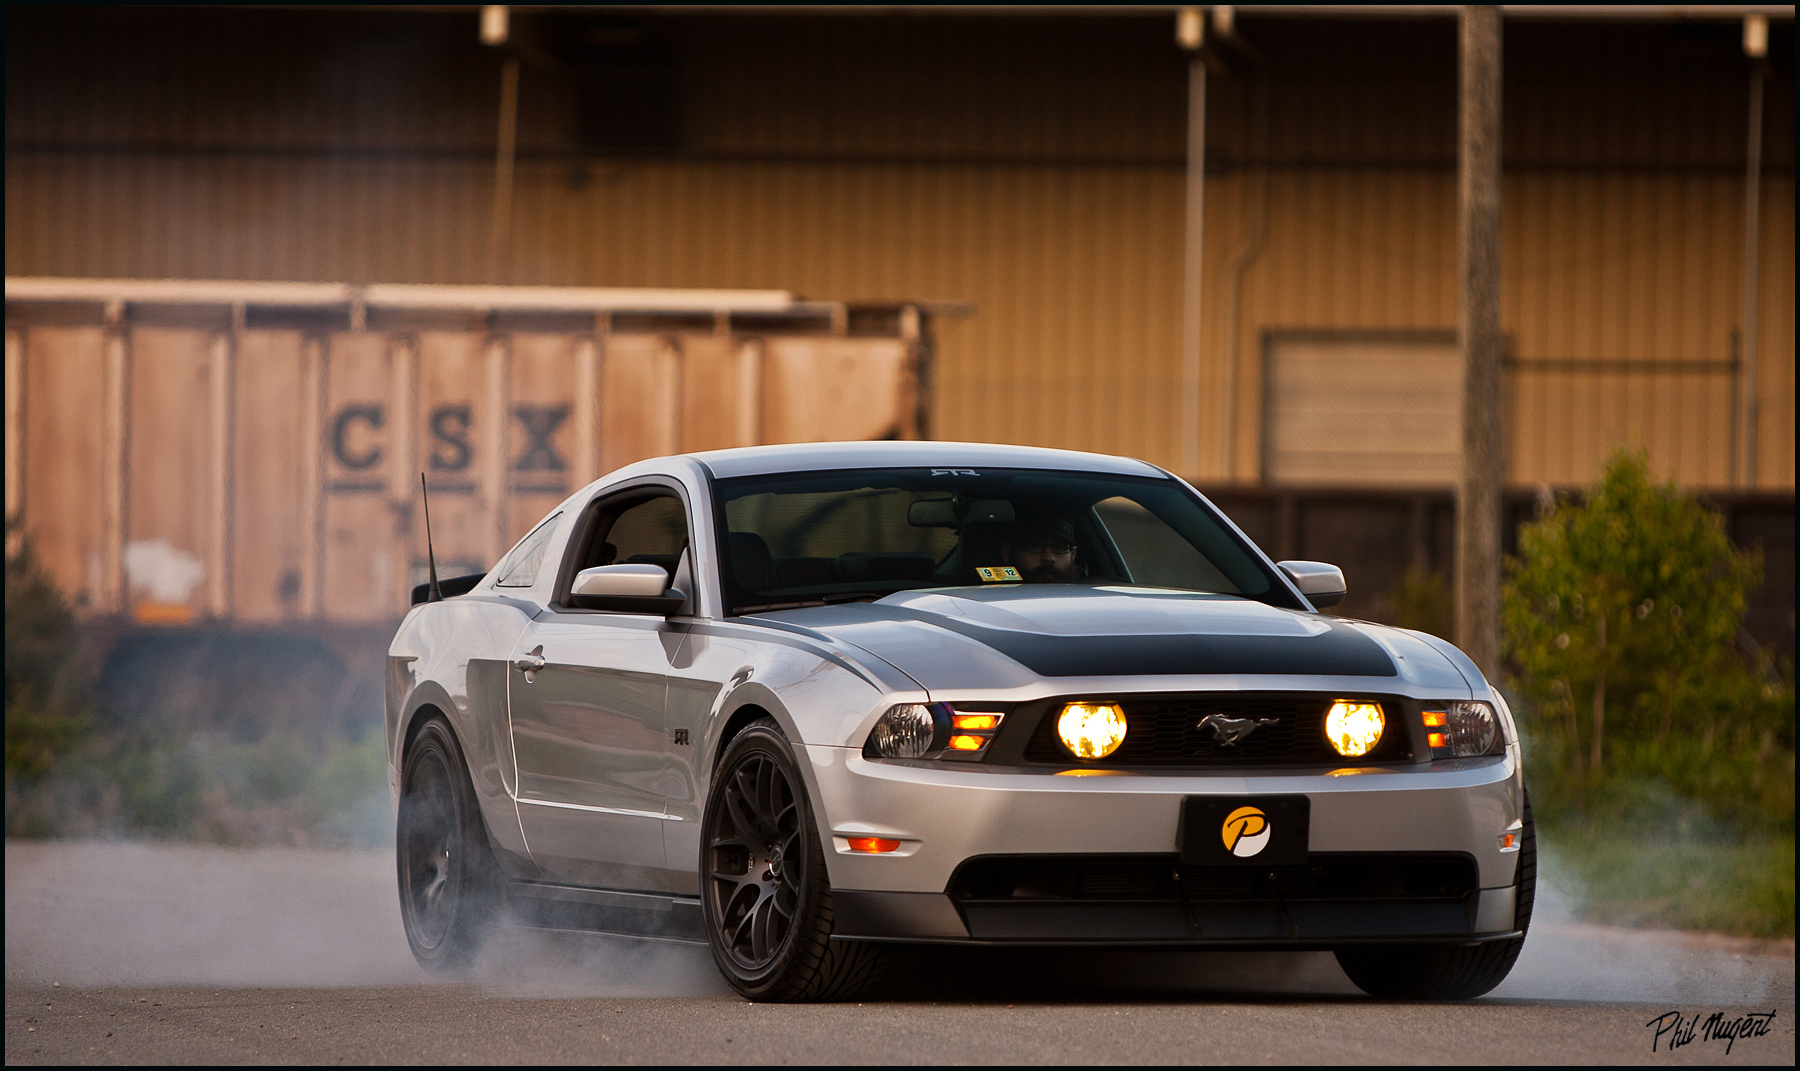 ford, Mustang, Rtr, 2012, Muscle, Supercar, Supercars Wallpaper